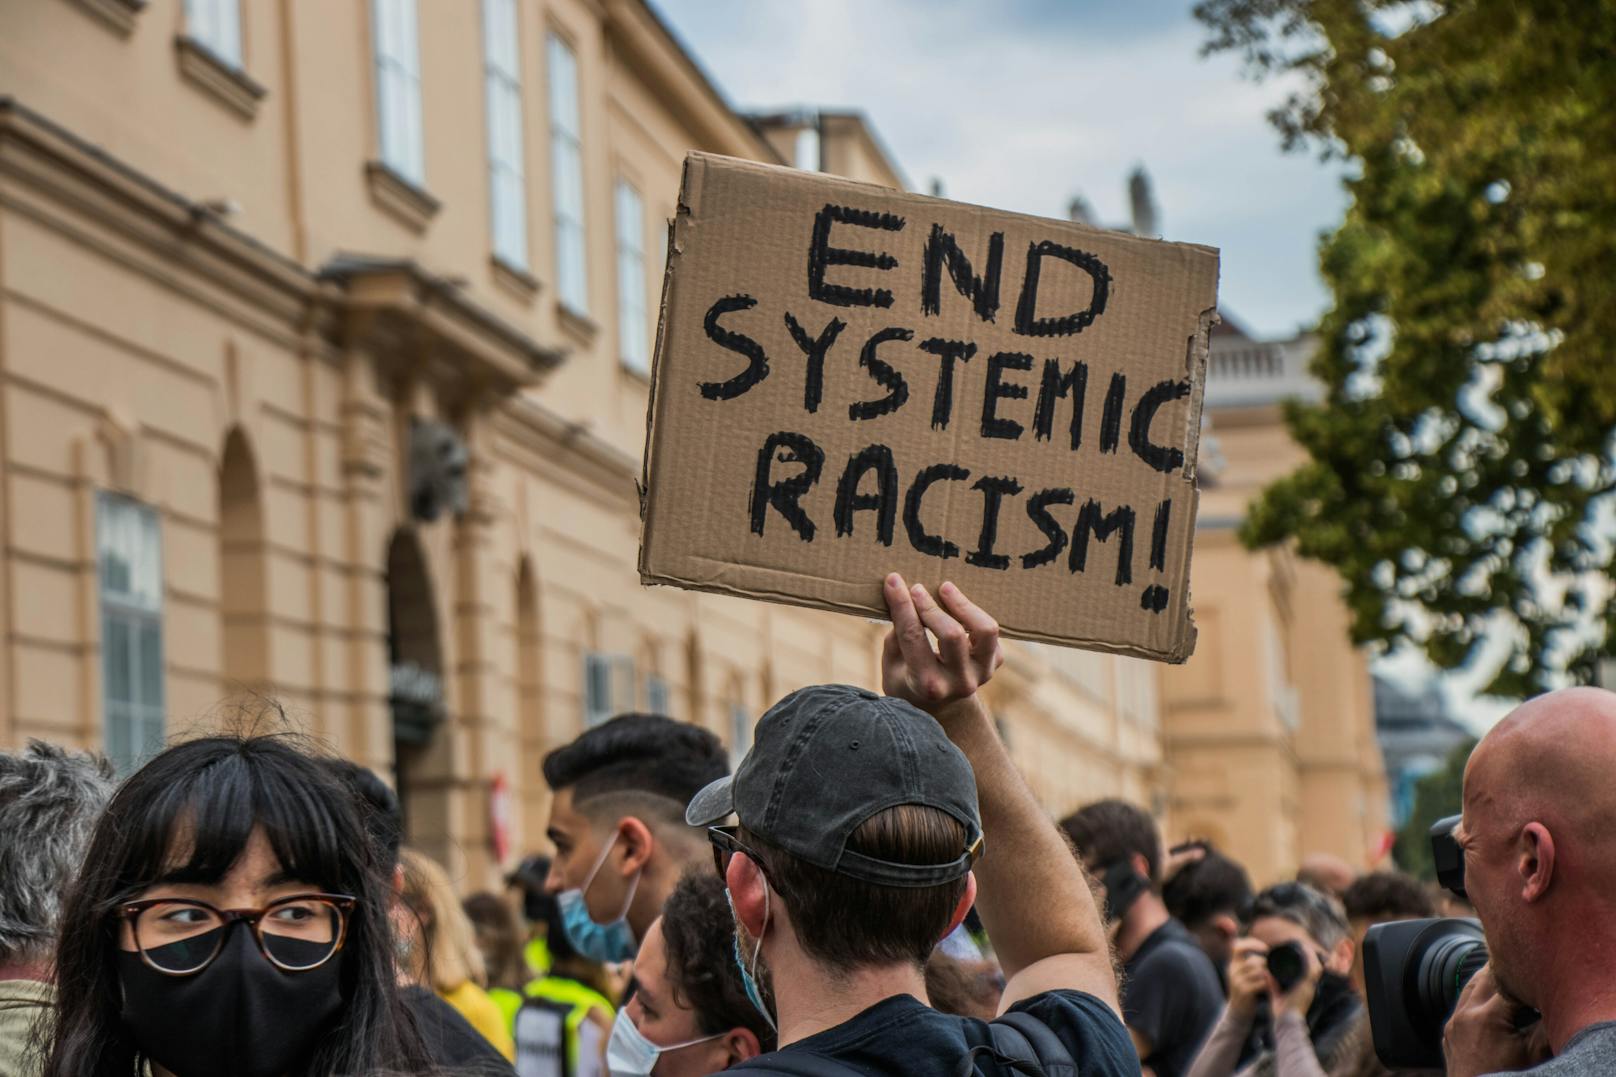 "End systemic racism!"